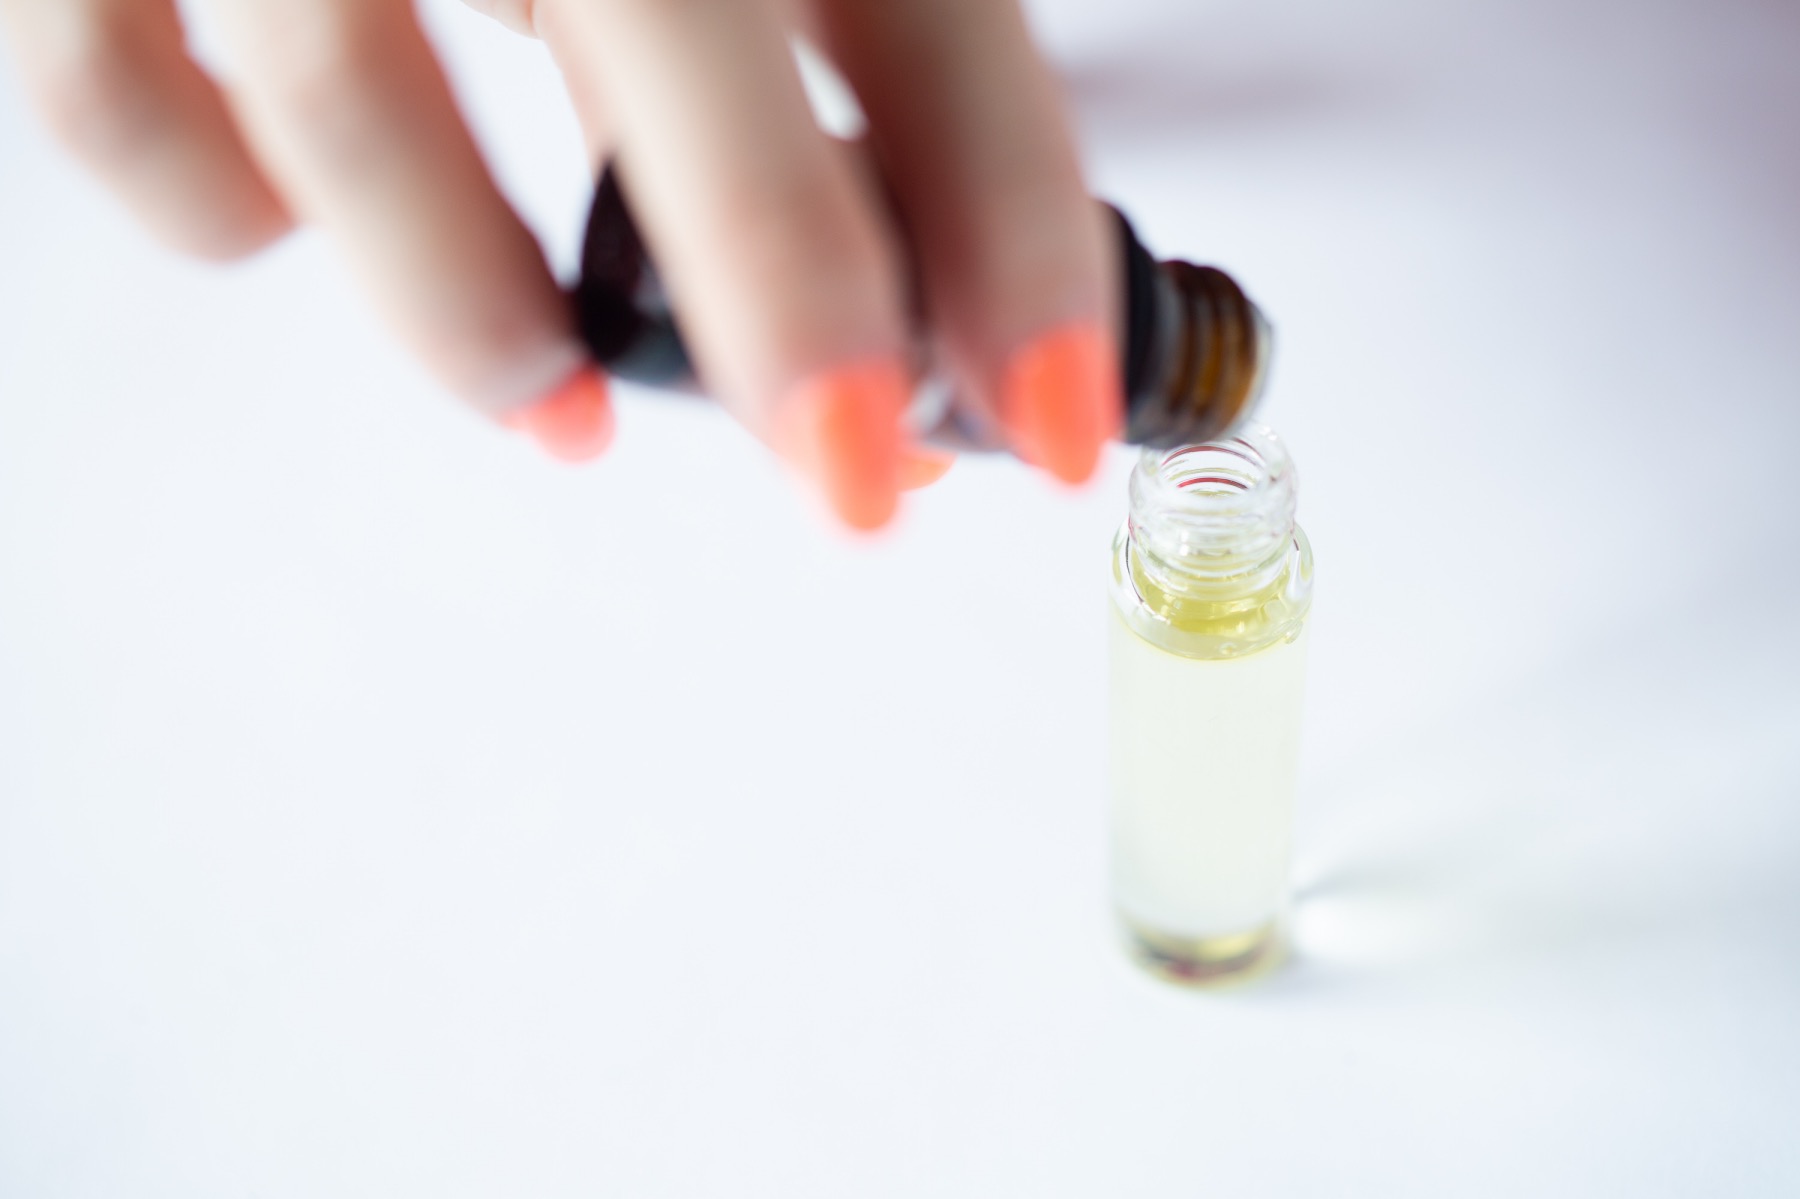 drop the essential oils into the roller ball